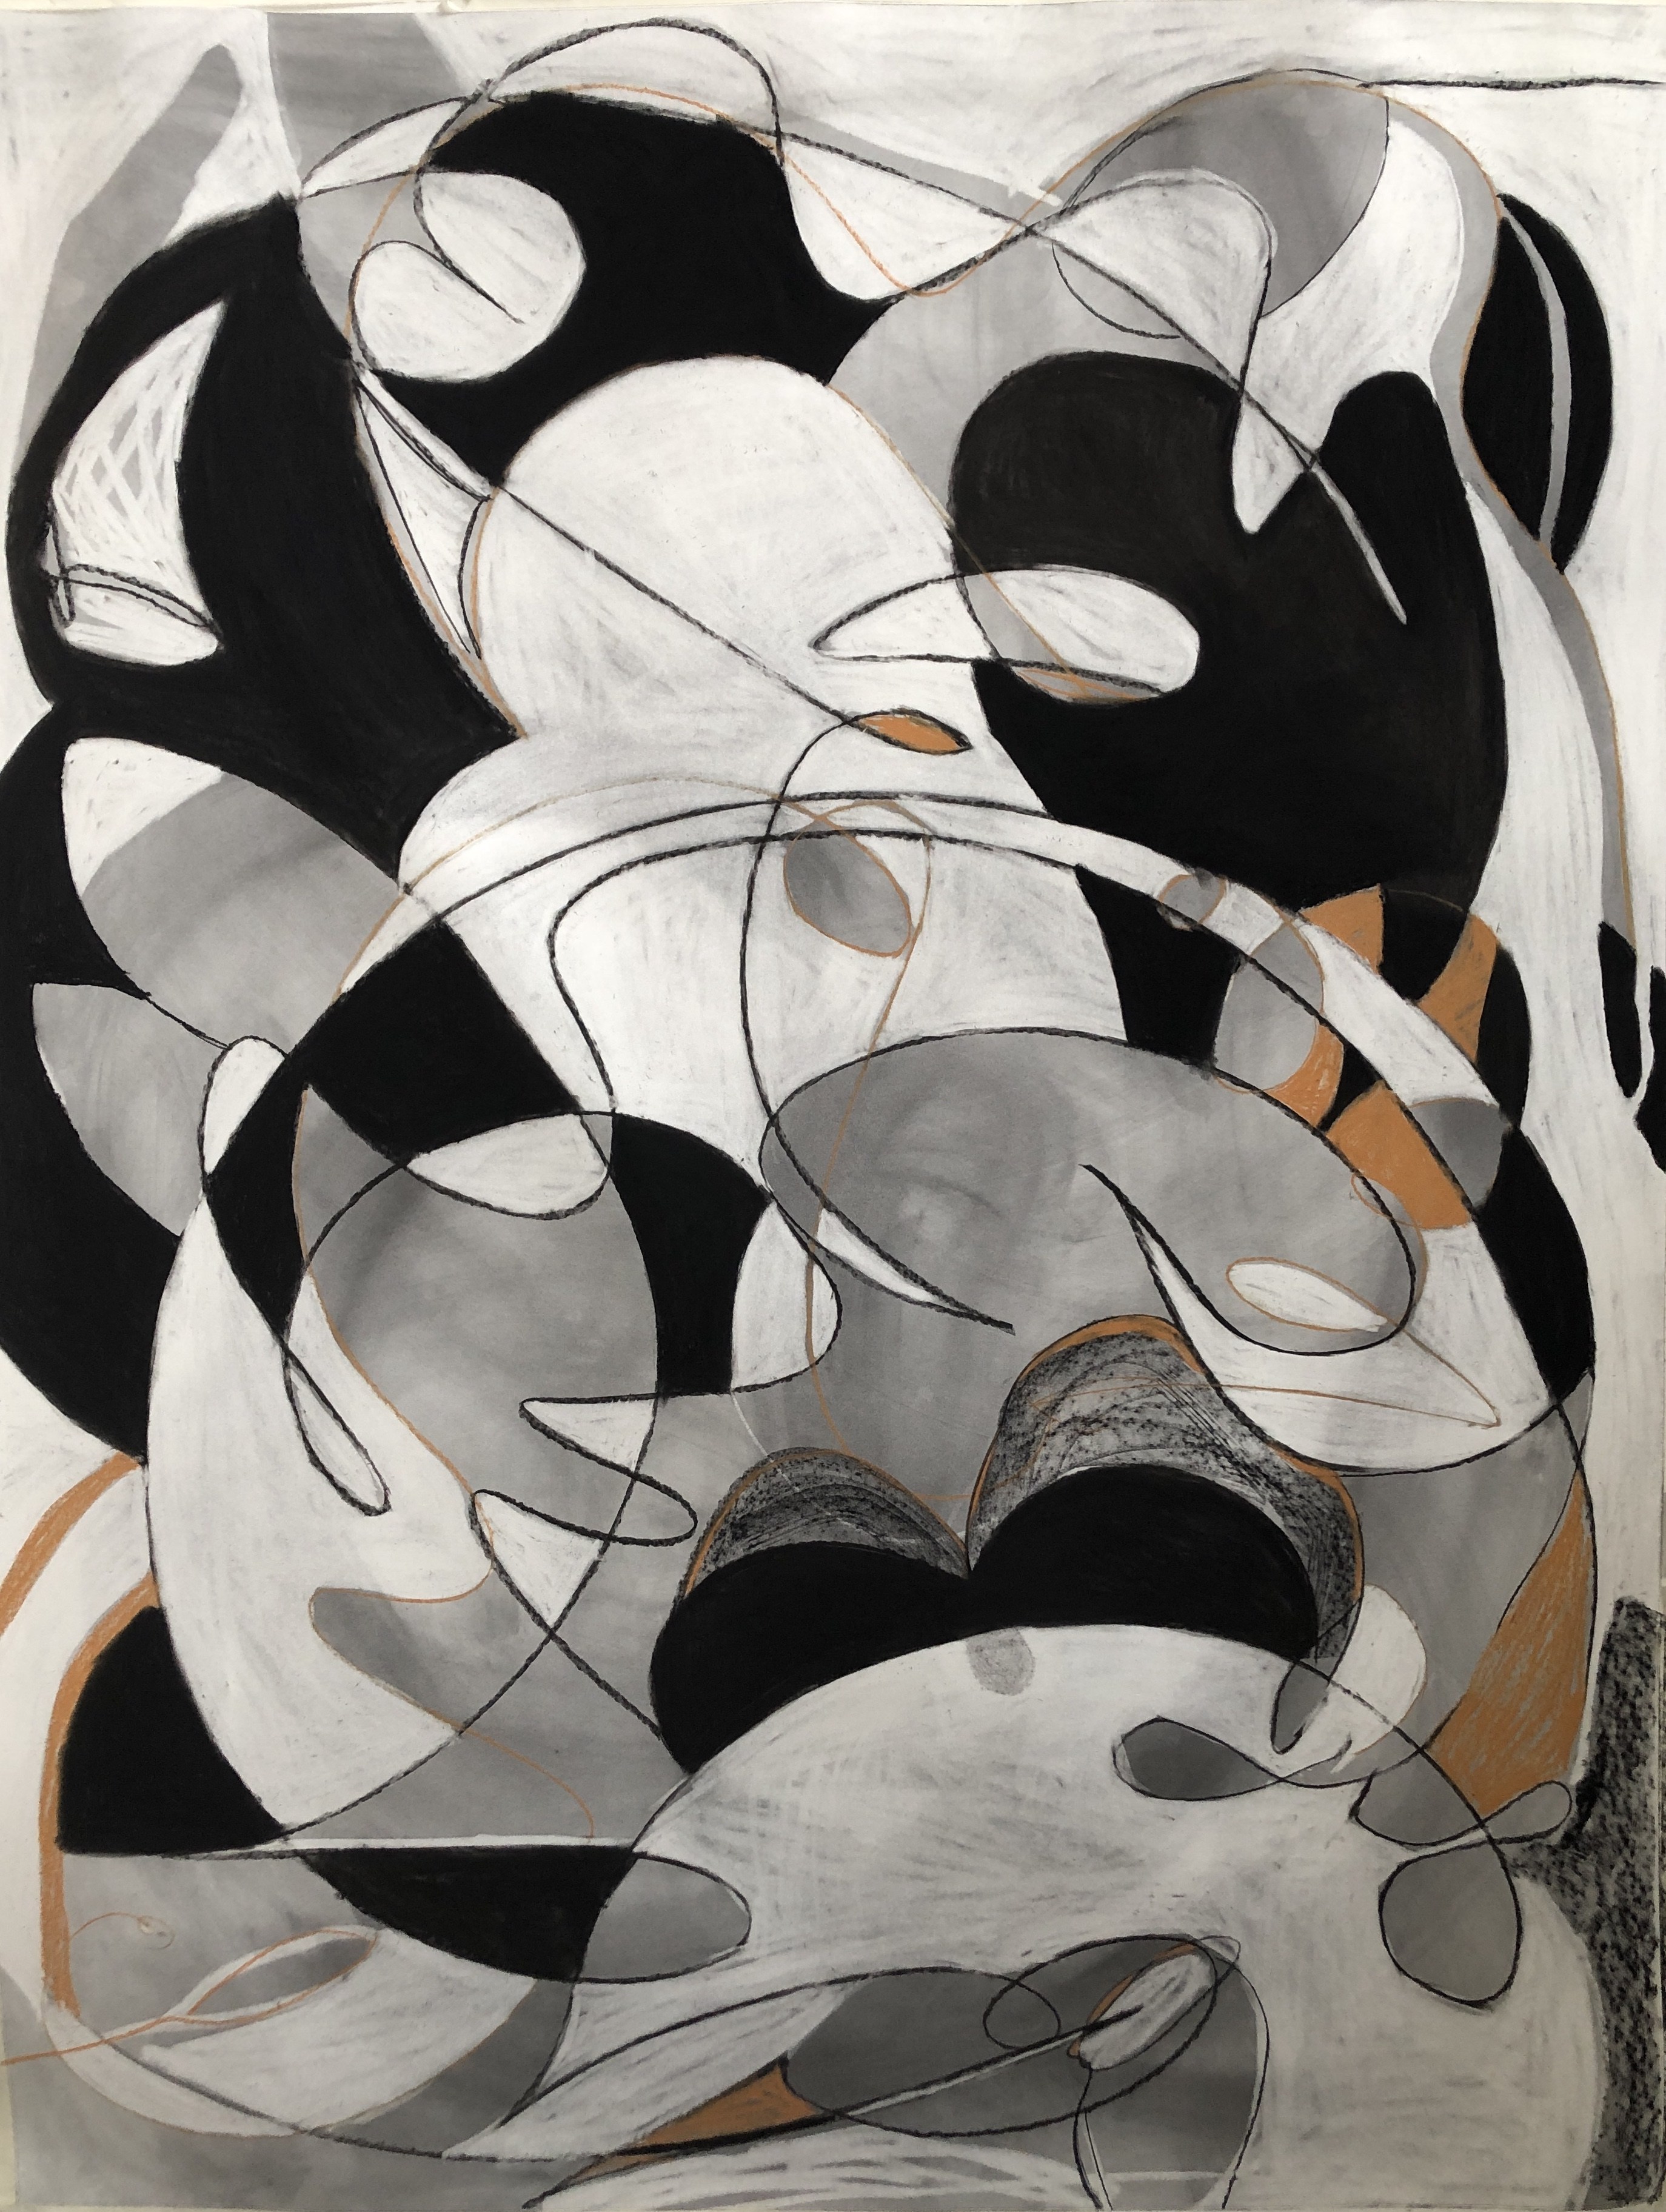 Gira Gira, 71 x 55 inches, charcoal and conte crayon on paper, 2019